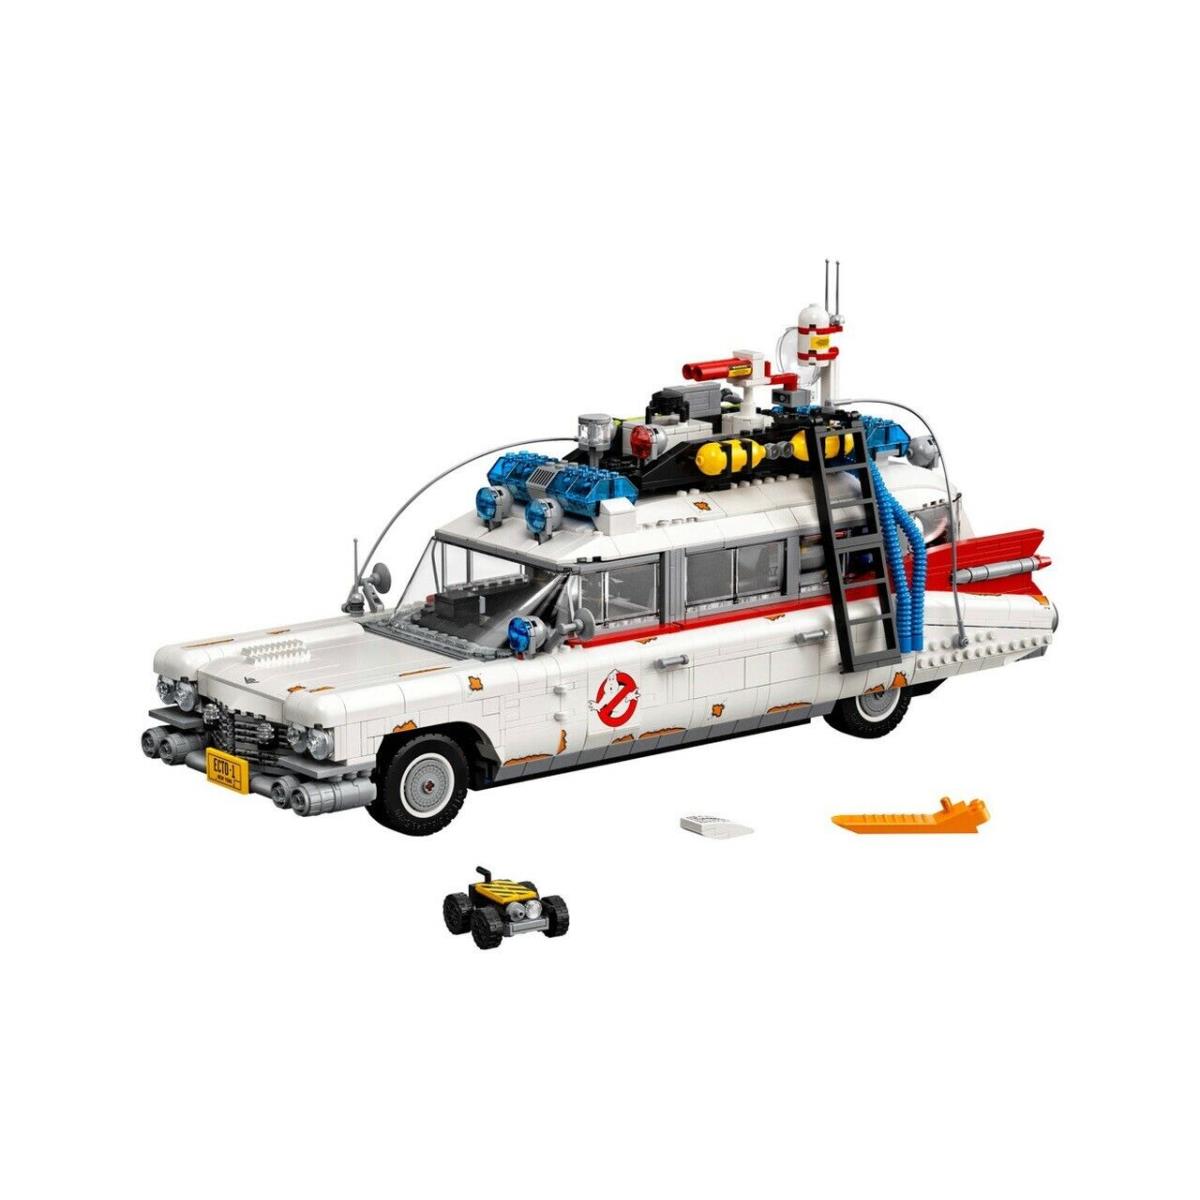 Lego 10274 Ghostbusters Ecto 1 Ready To Ship 2352pcs Free S/h